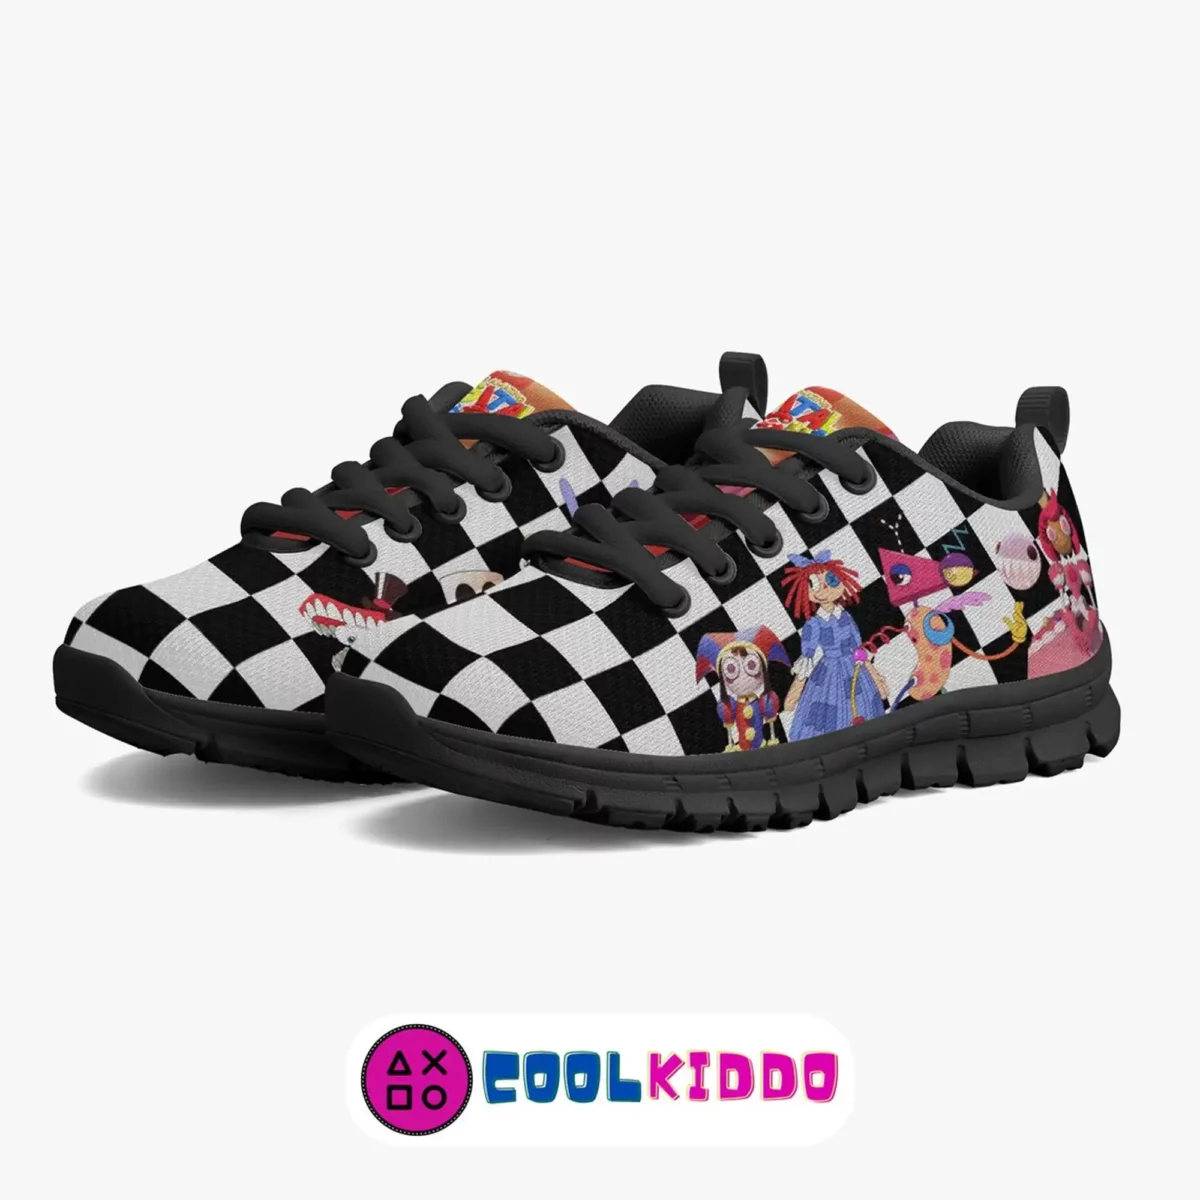 Personalized Shoes | The Amazing Digital Circus Animated Series Inspired Lightweight Mesh Sneakers Cool Kiddo 20